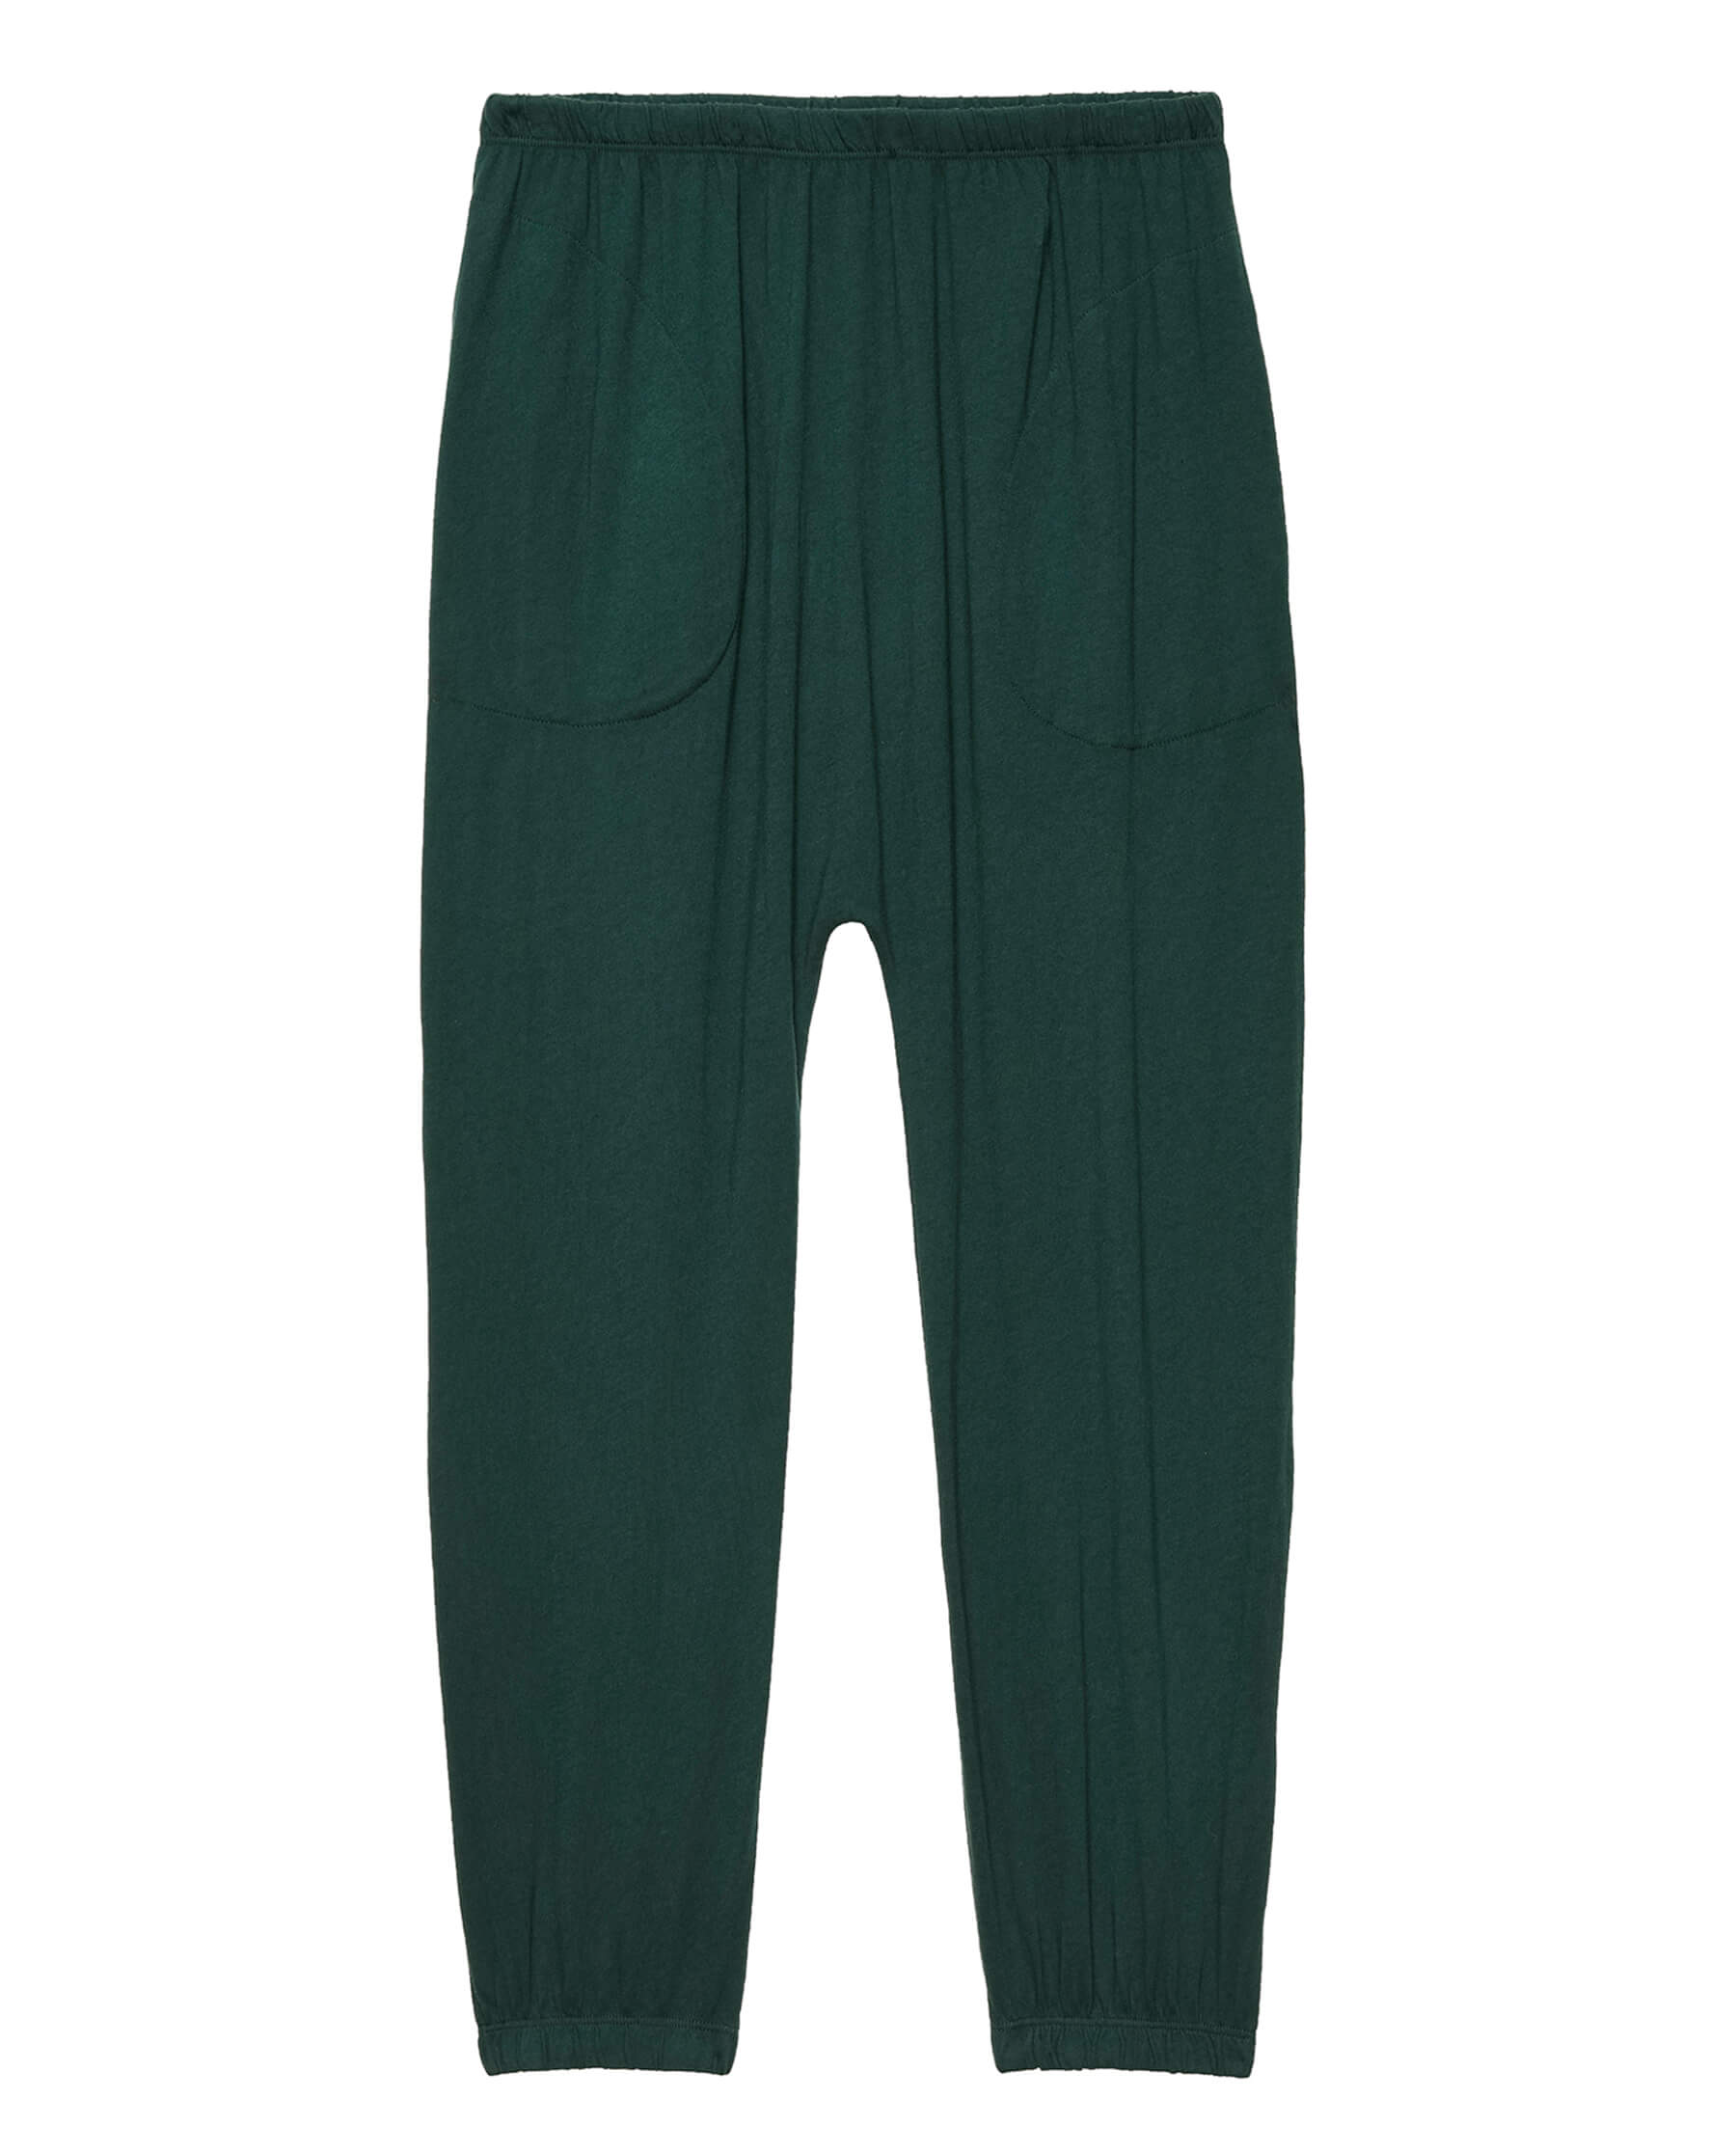 The Jersey Jogger Pant. -- Green Grove